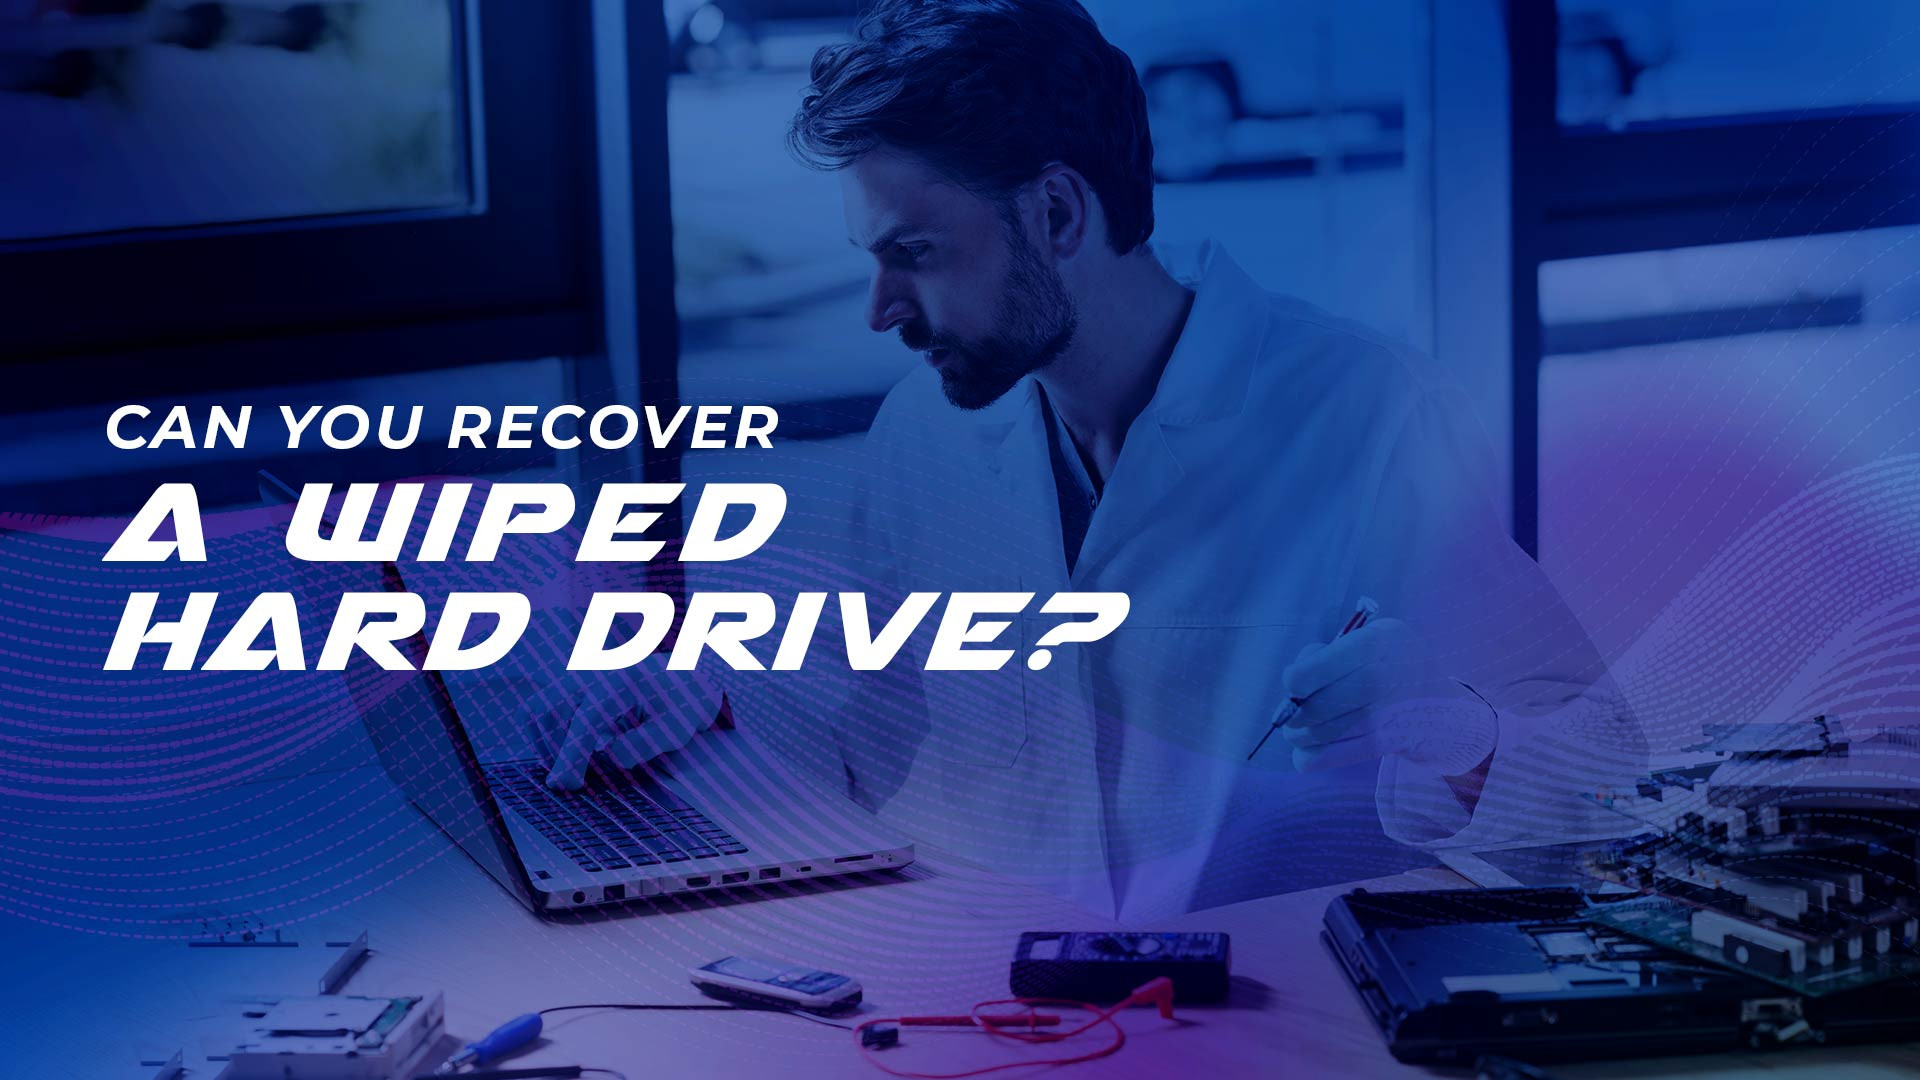 Can you recover a wiped hard drive